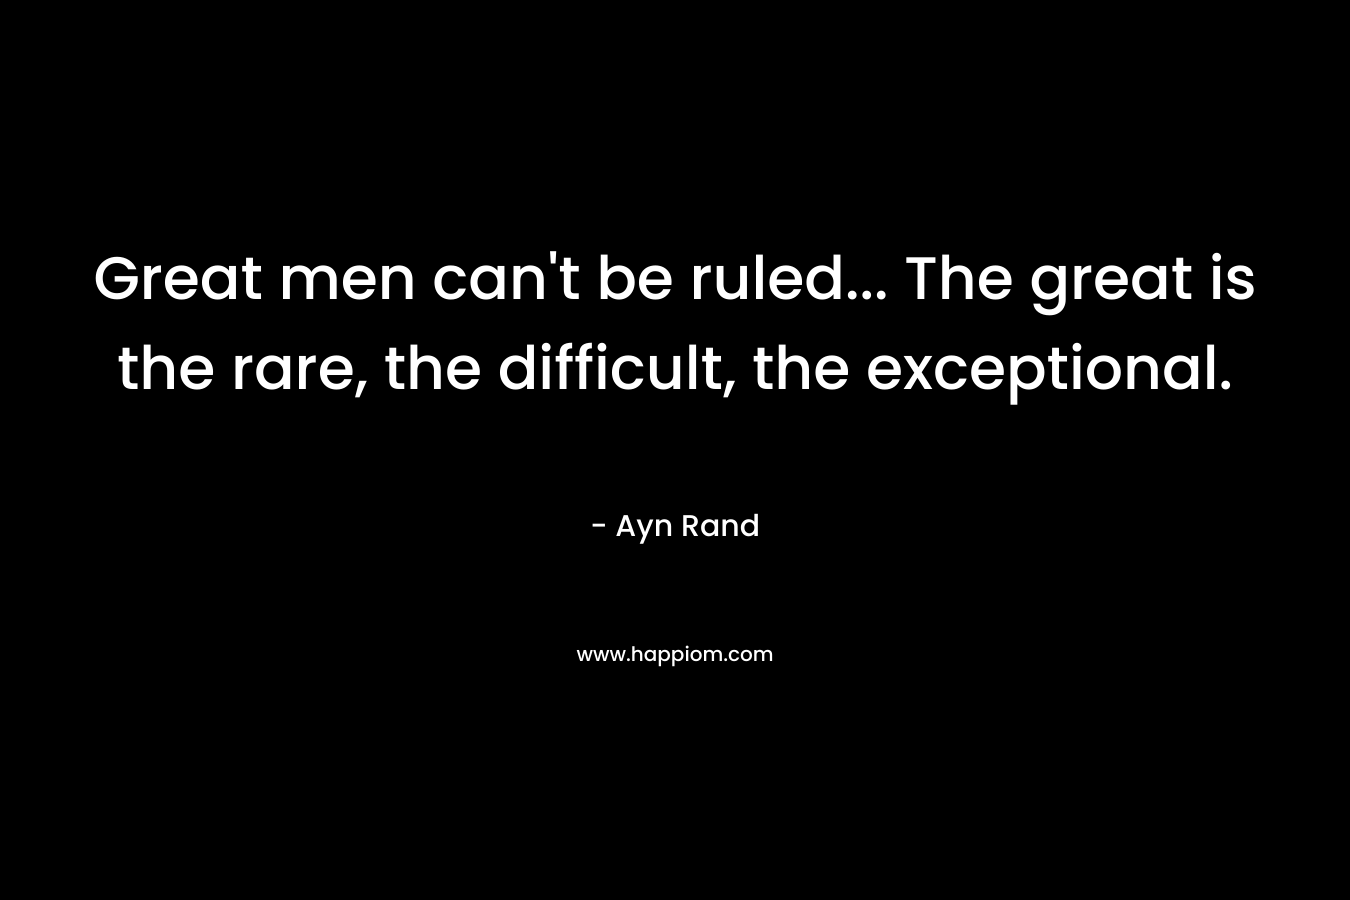 Great men can’t be ruled… The great is the rare, the difficult, the exceptional. – Ayn Rand